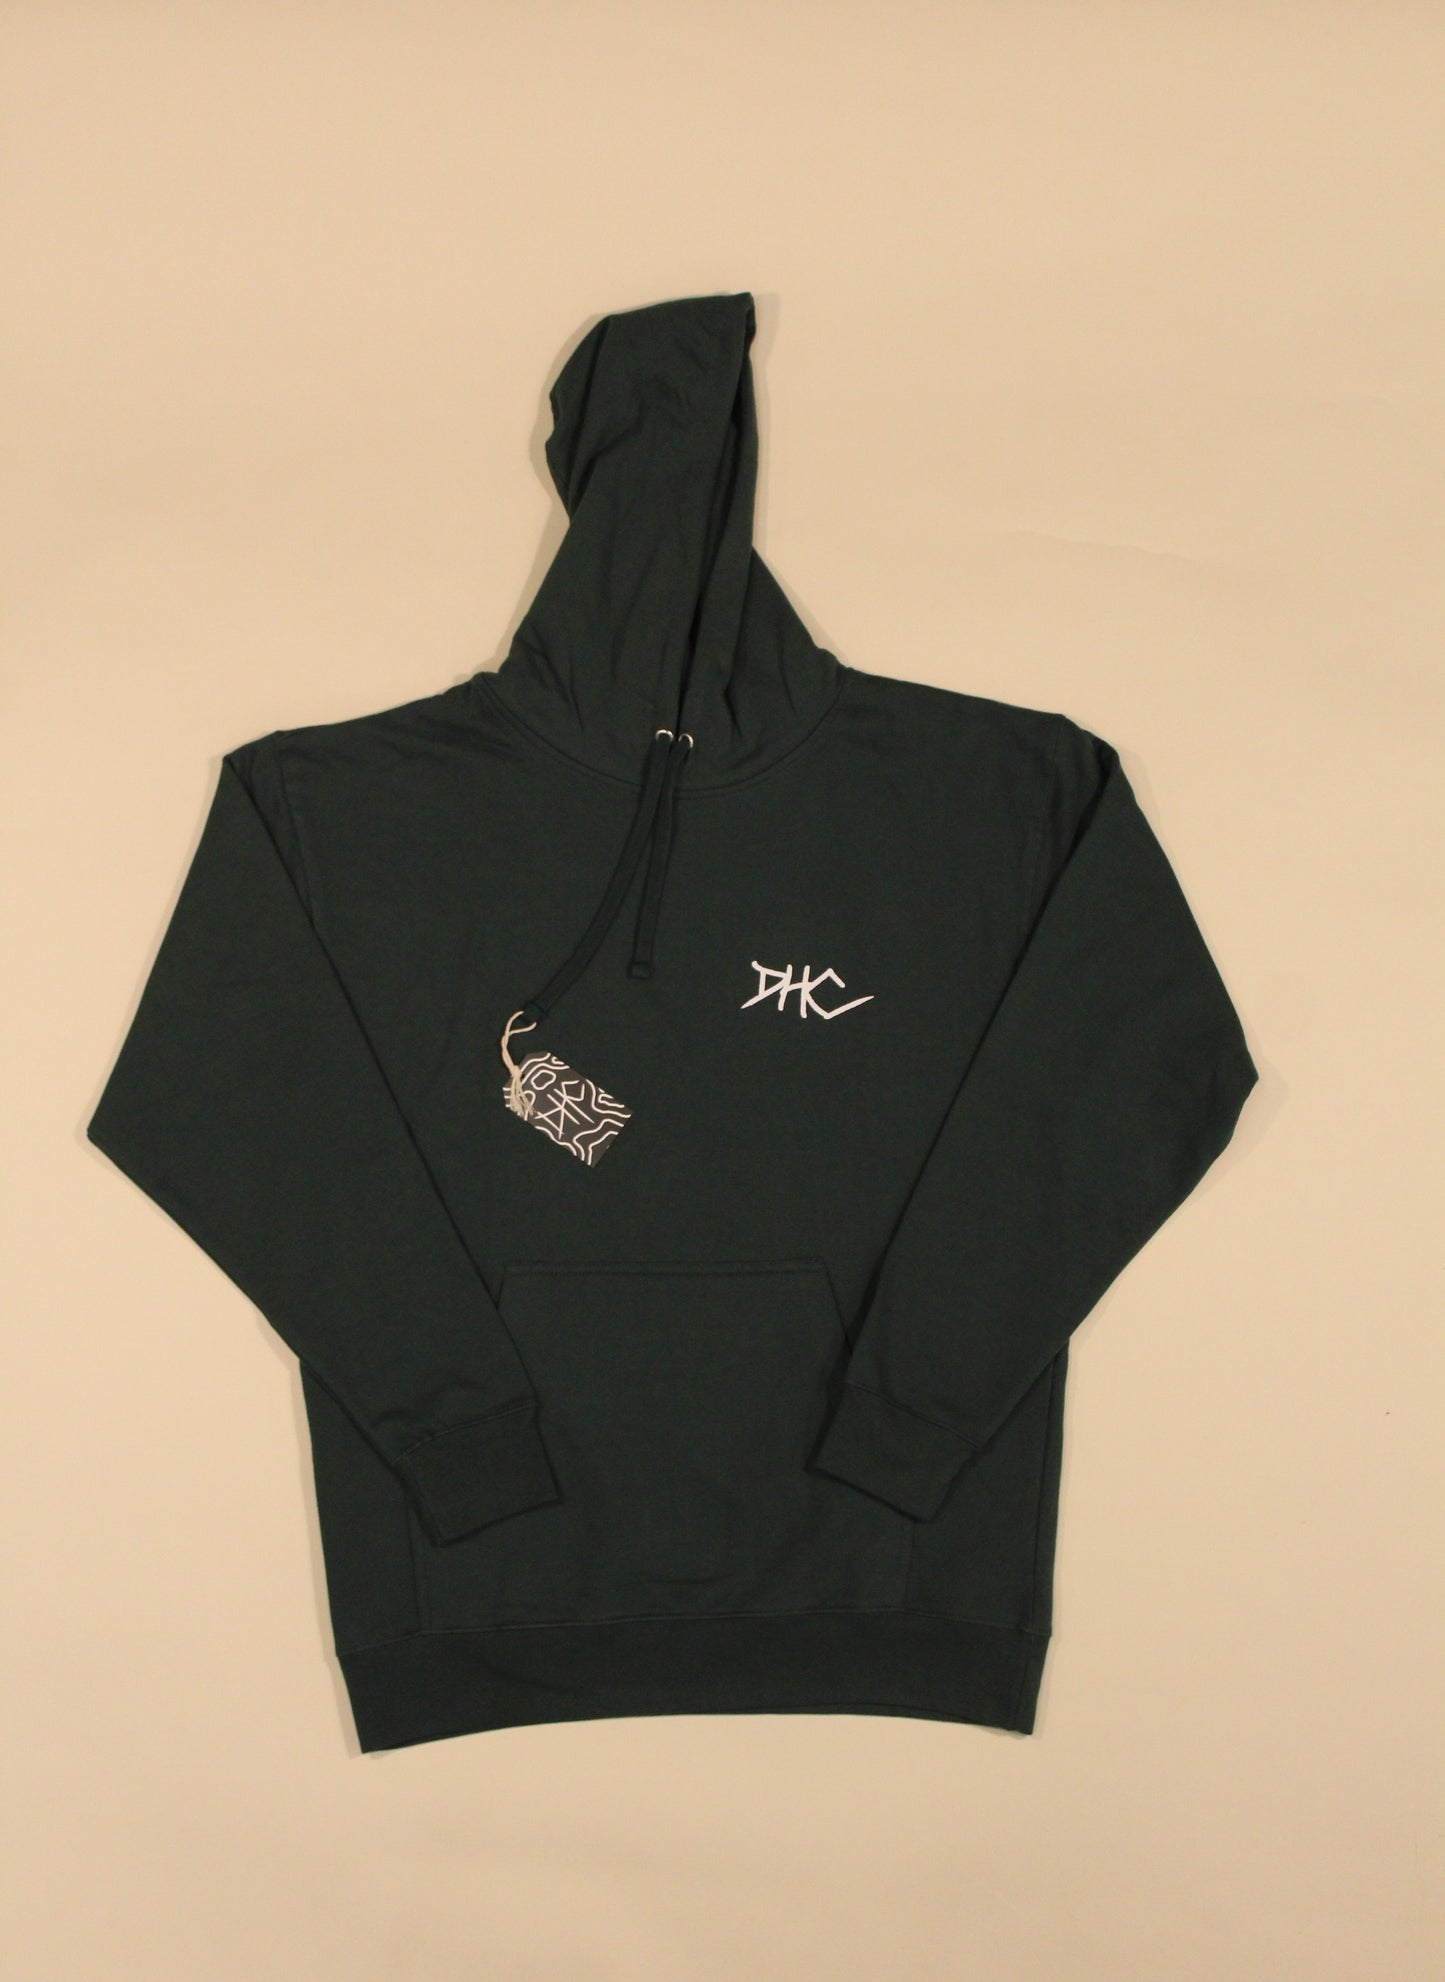 Original DHC Hoodie | Limited Time